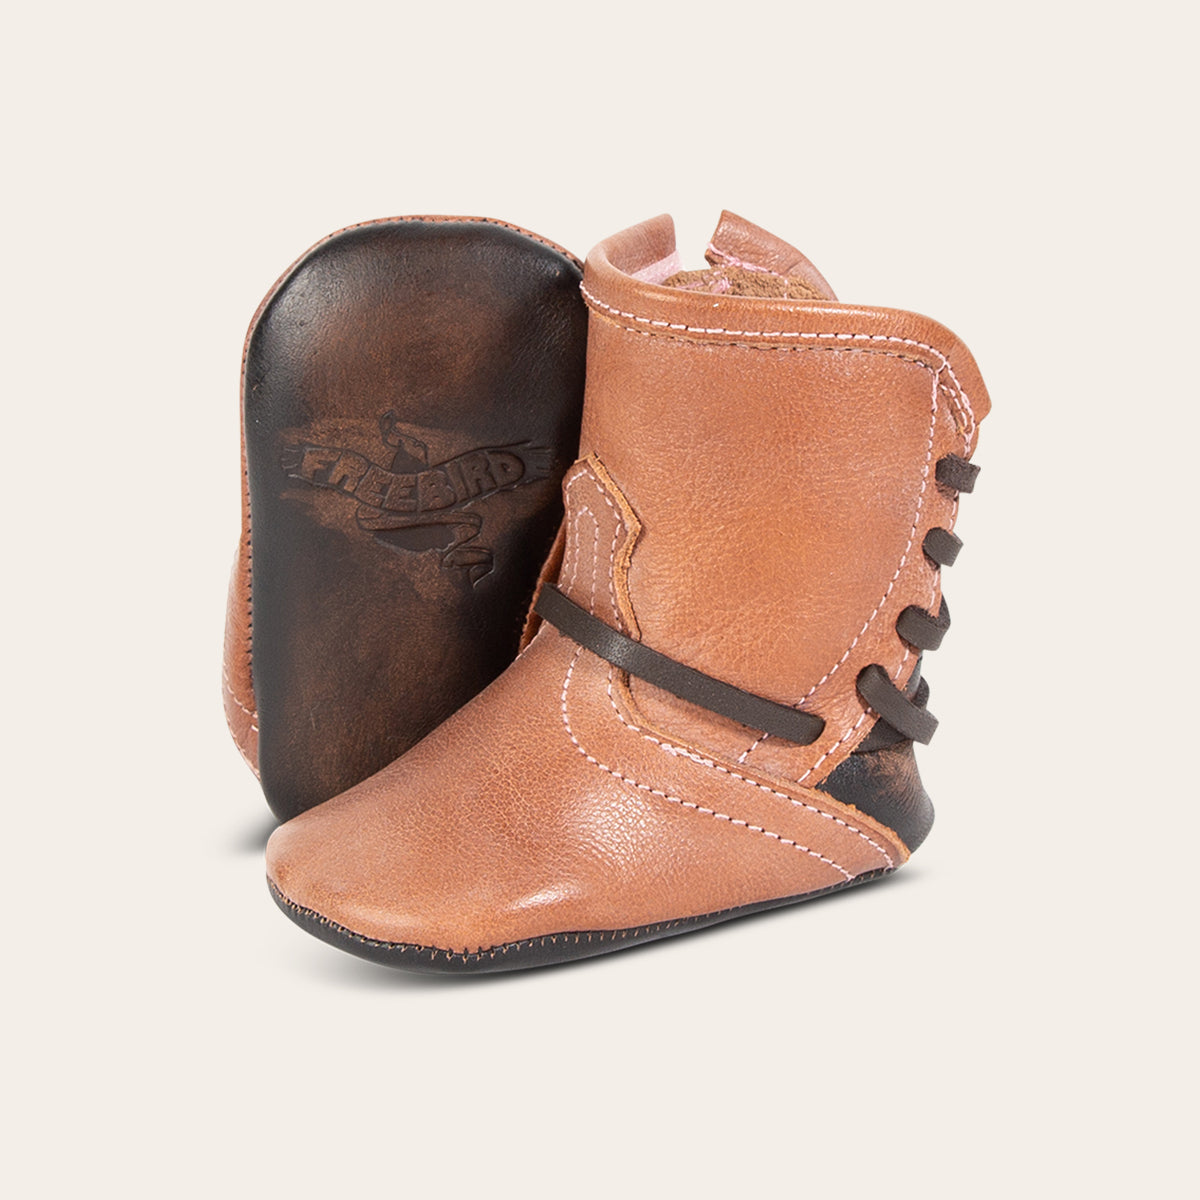 front view showing contrasting leather lace detailing and soft leather imprinted sole on FREEBIRD infant baby coal dusty rose leather bootie 